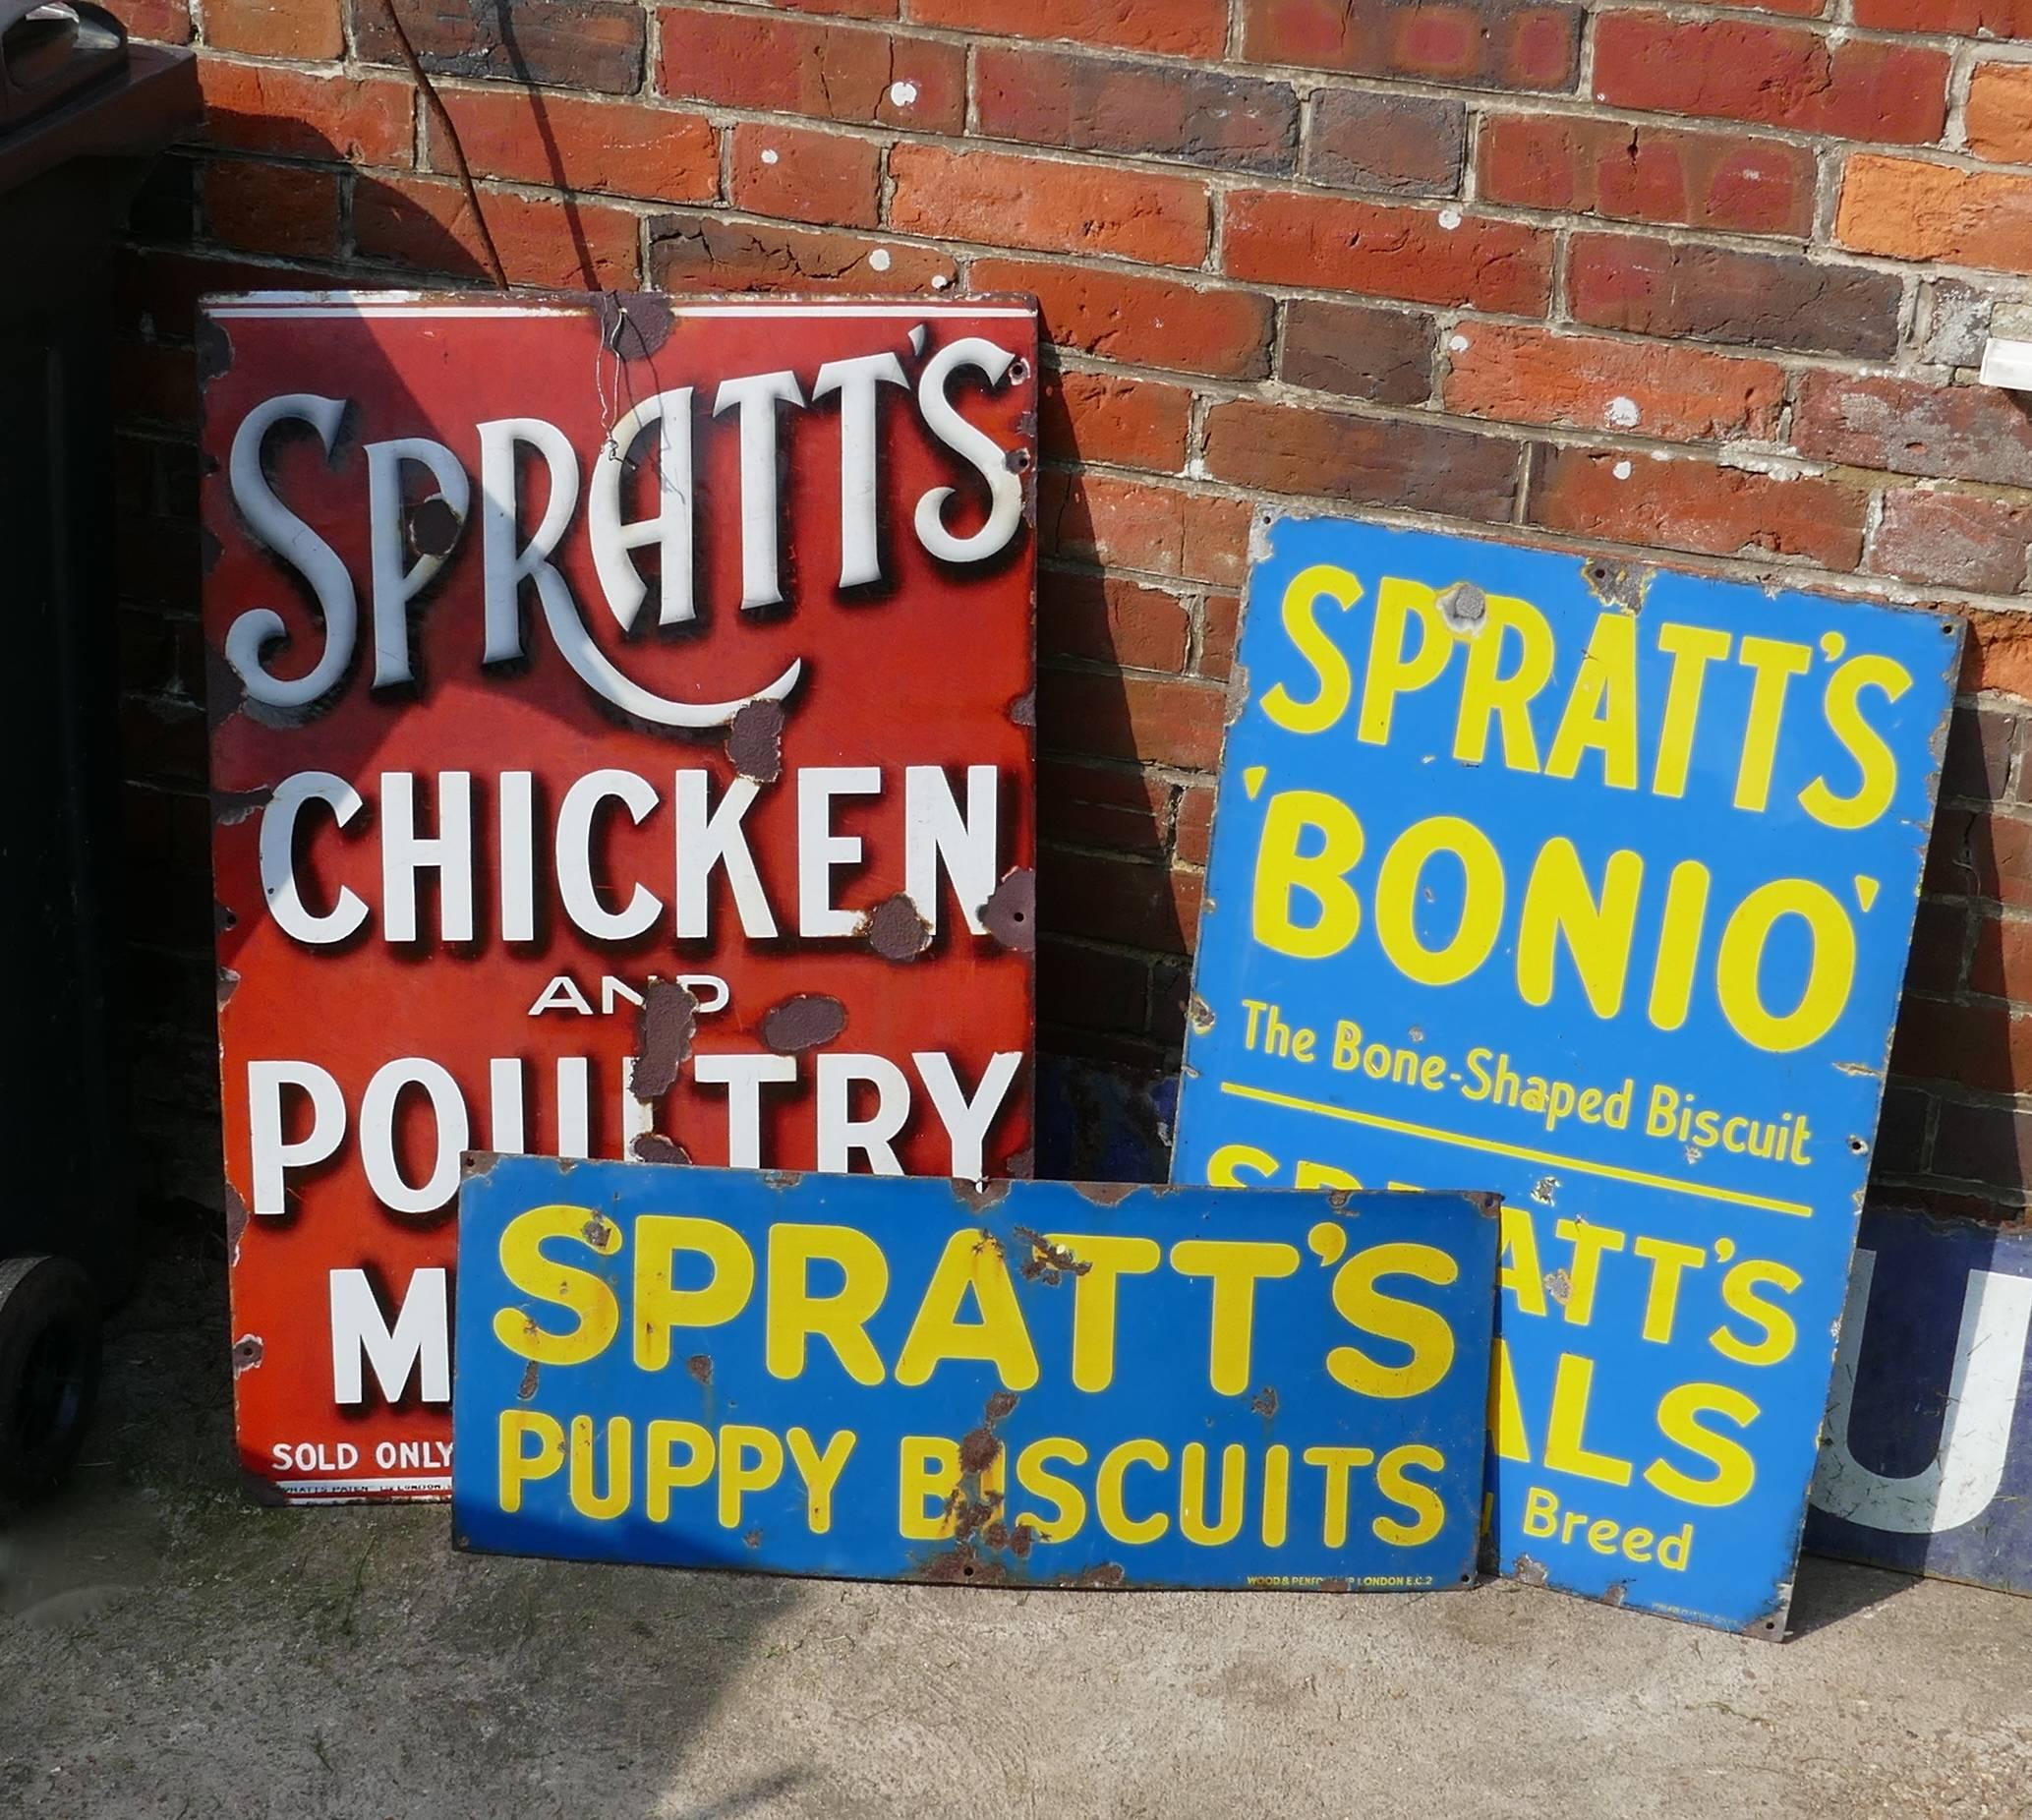 Original Spratt’s enamel sign 

Very rare old sign, blue background, bright yellow writing advertising Puppy Biscuits

The sign is in good general condition it is made in ceramic enamel and has some rust and chipping there is a small hole at the